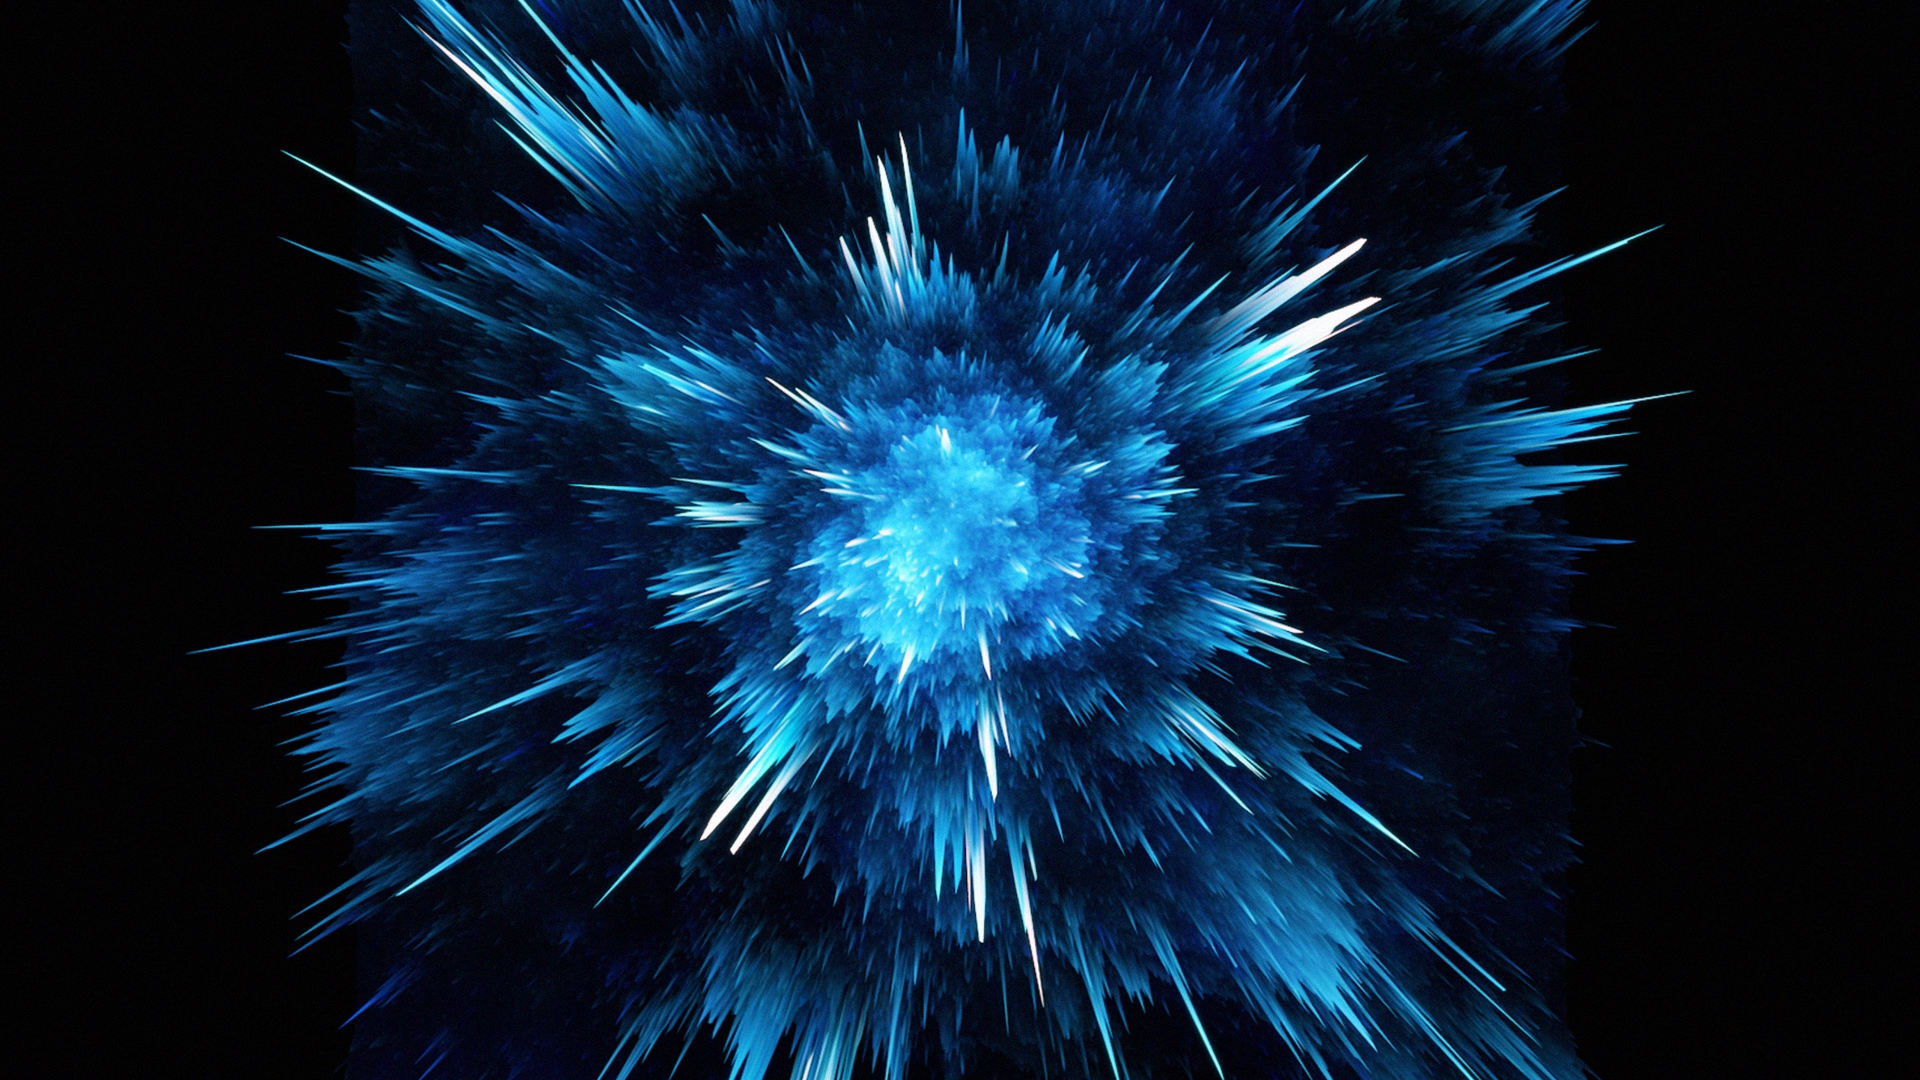 Download Wallpaper 1920x1080 Abstraction Blue Lines Explosion